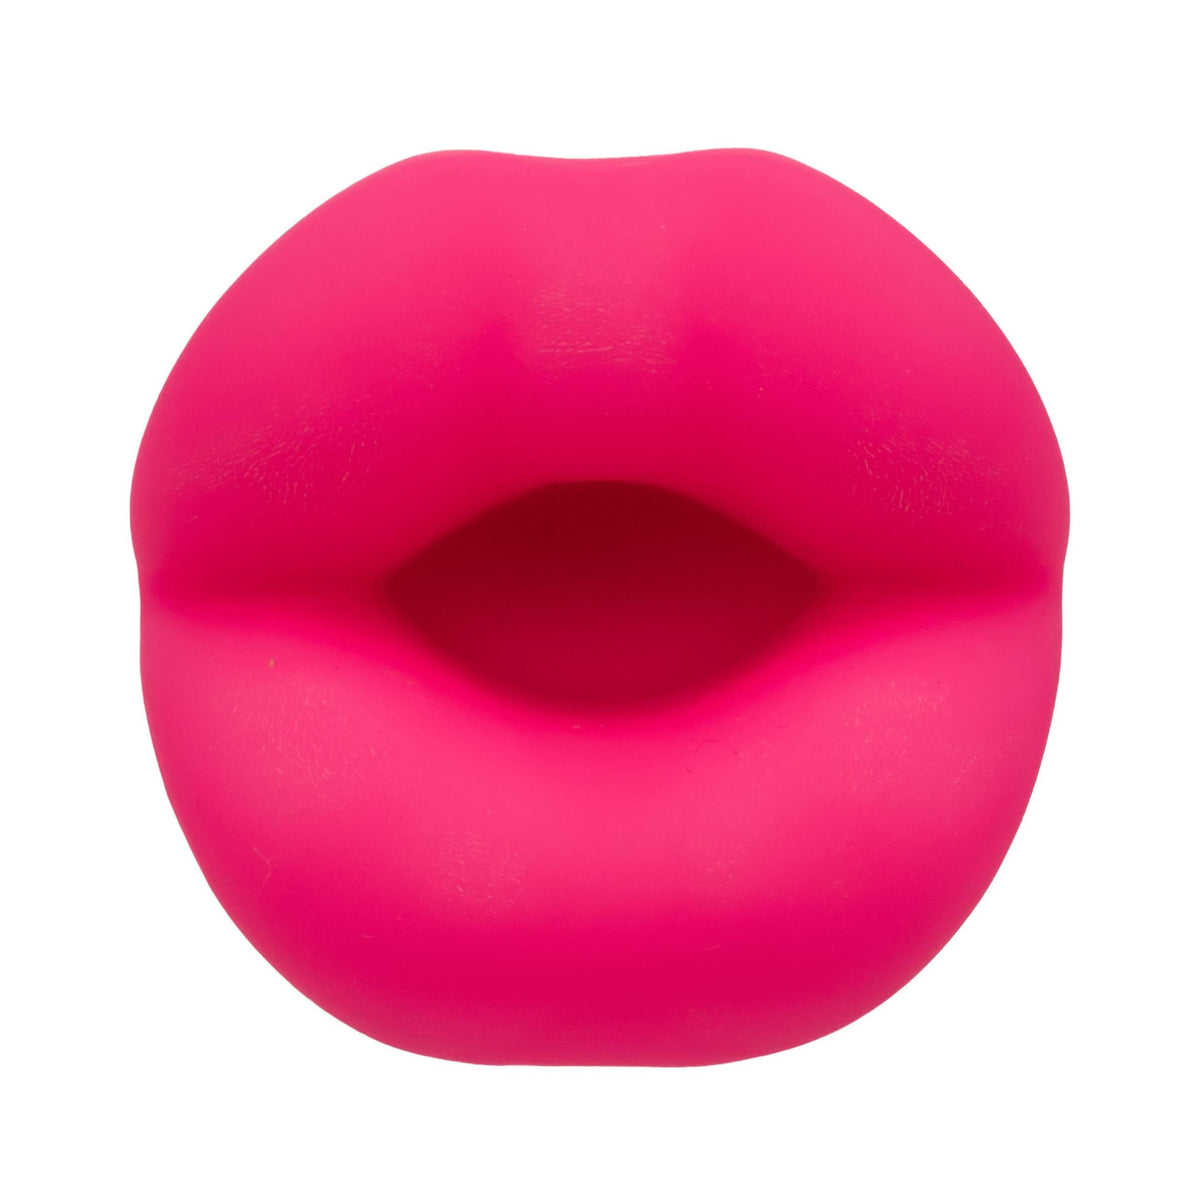 kyst lips pink